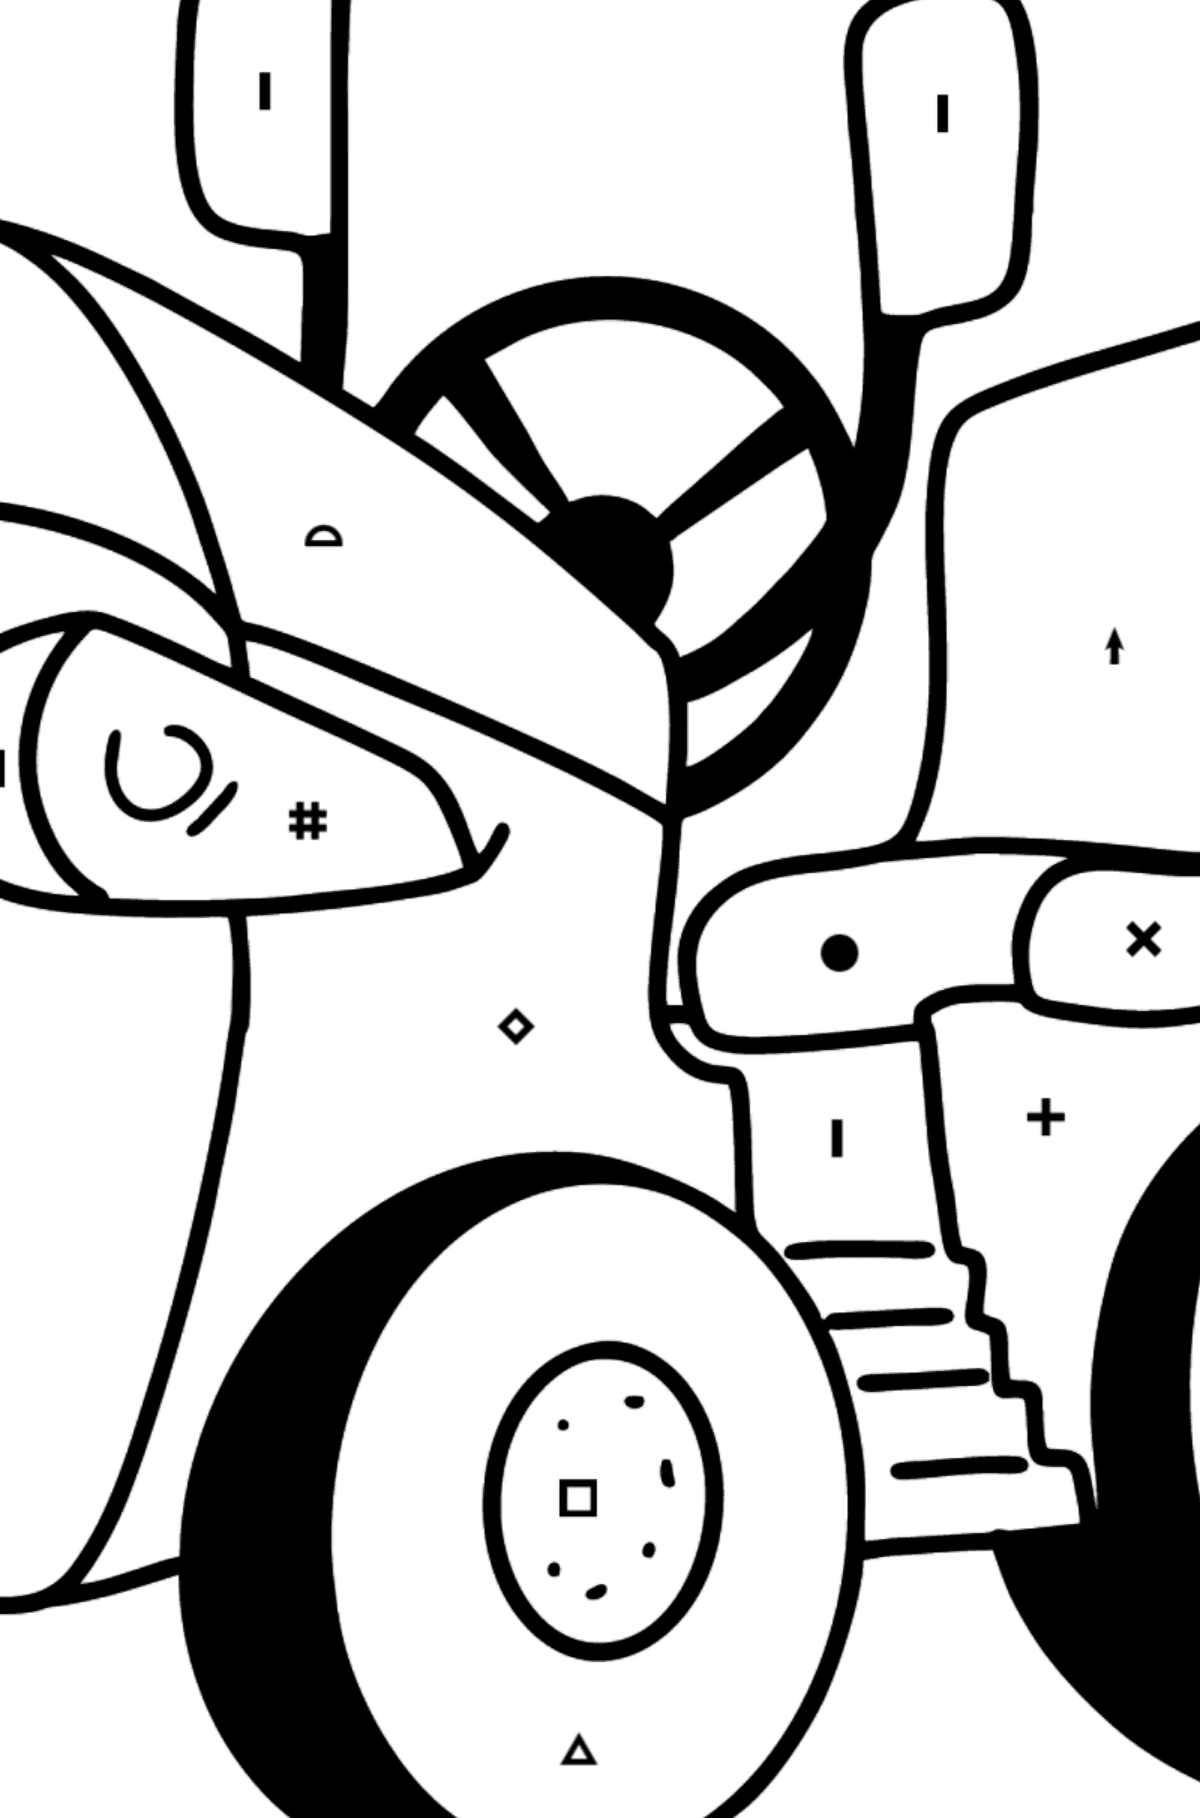 T-15 Mini Tractor Fighter coloring page - Coloring by Symbols and Geometric Shapes for Kids